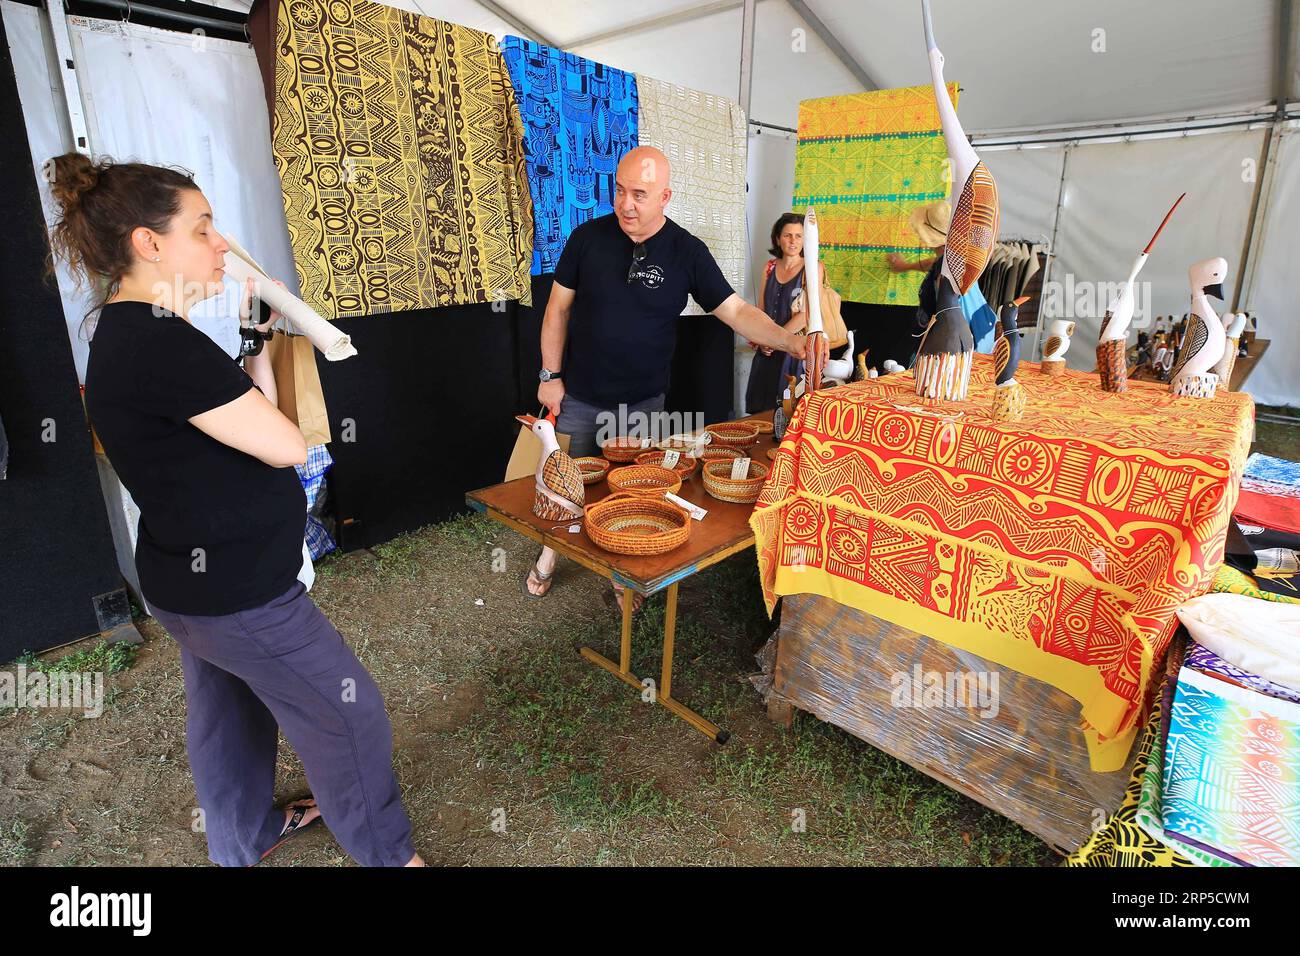 (181209) -- CANBERRA, Dec. 9, 2018 (Xinhua) -- People visit the Indigenous Art Market near National Museum in Canberra, Australia, on Dec. 8, 2018. The Indigenous Art Market was held here from Dec. 7 to Dec. 8, which gave an opportunity for people to encounter and engage in aboriginal culture and sought for support to aboriginal people in local and other communities. (Xinhua/Pan Xiangyue) (zxj) AUSTRALIA-CANBERRA-INDIGENOUS ART MARKET PUBLICATIONxNOTxINxCHN Stock Photo